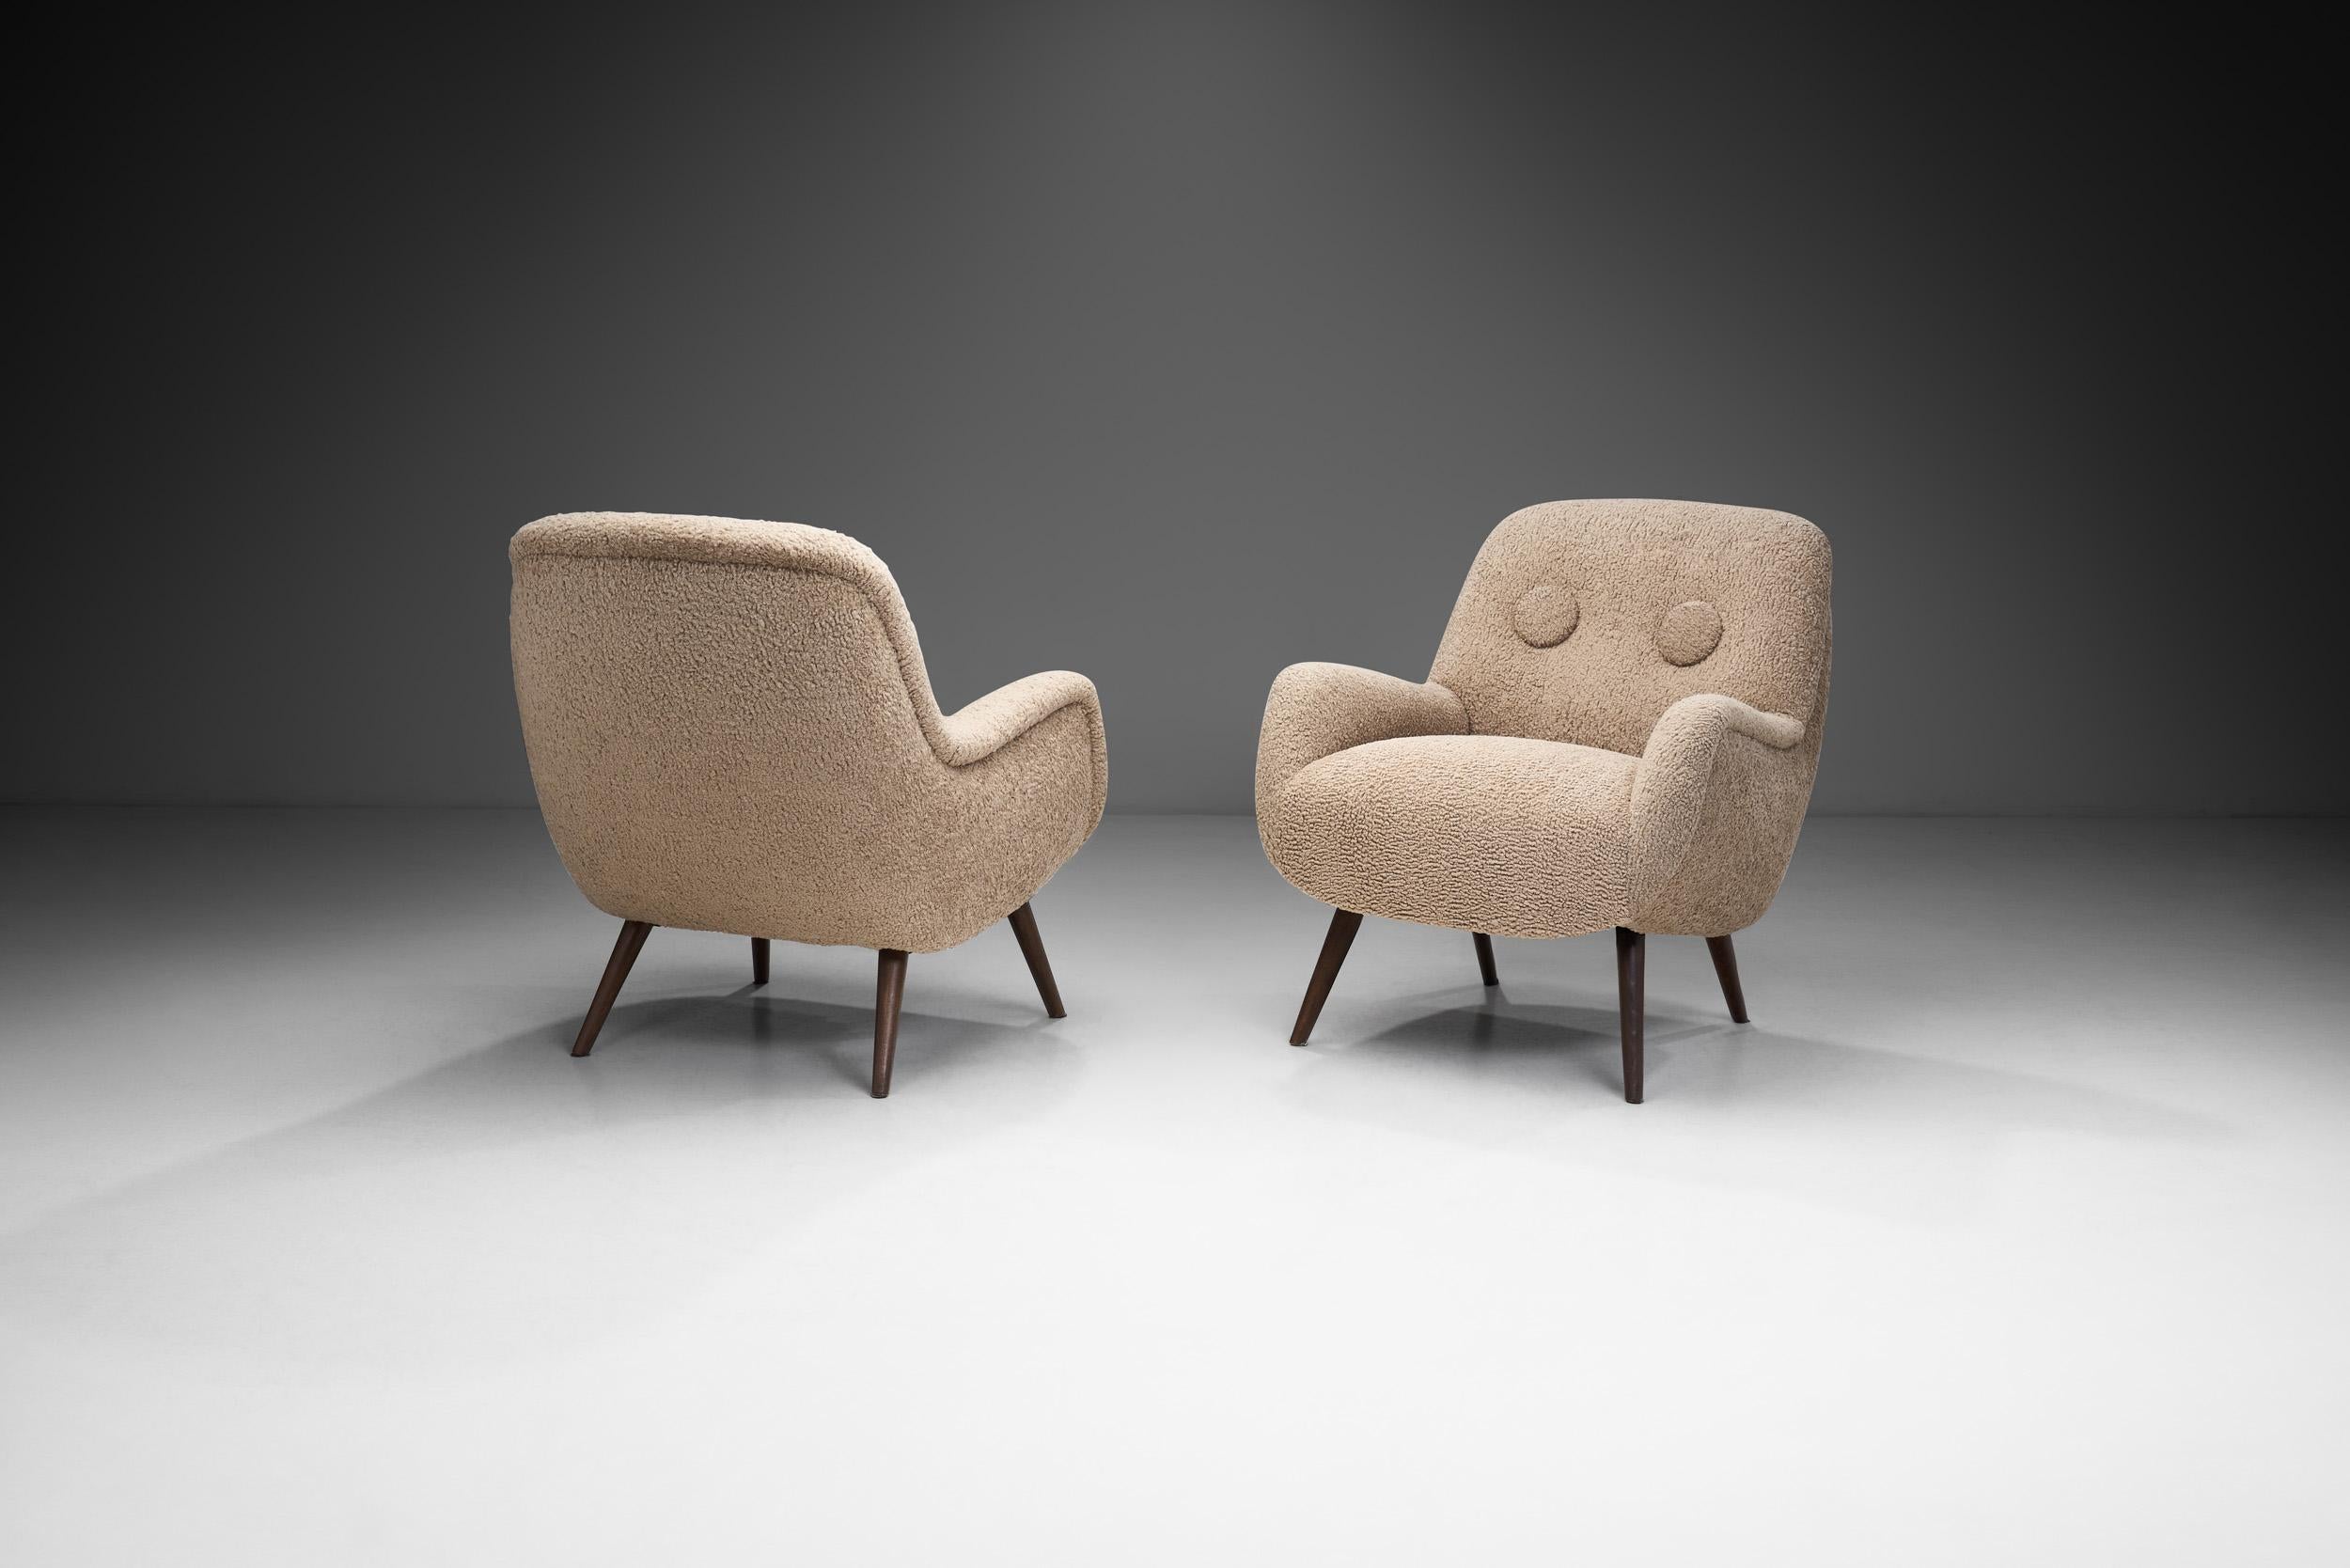 Mid-20th Century European Mid-Century Modern Lounge Chairs in Bouclé with Oak Legs, Europe 1960s For Sale